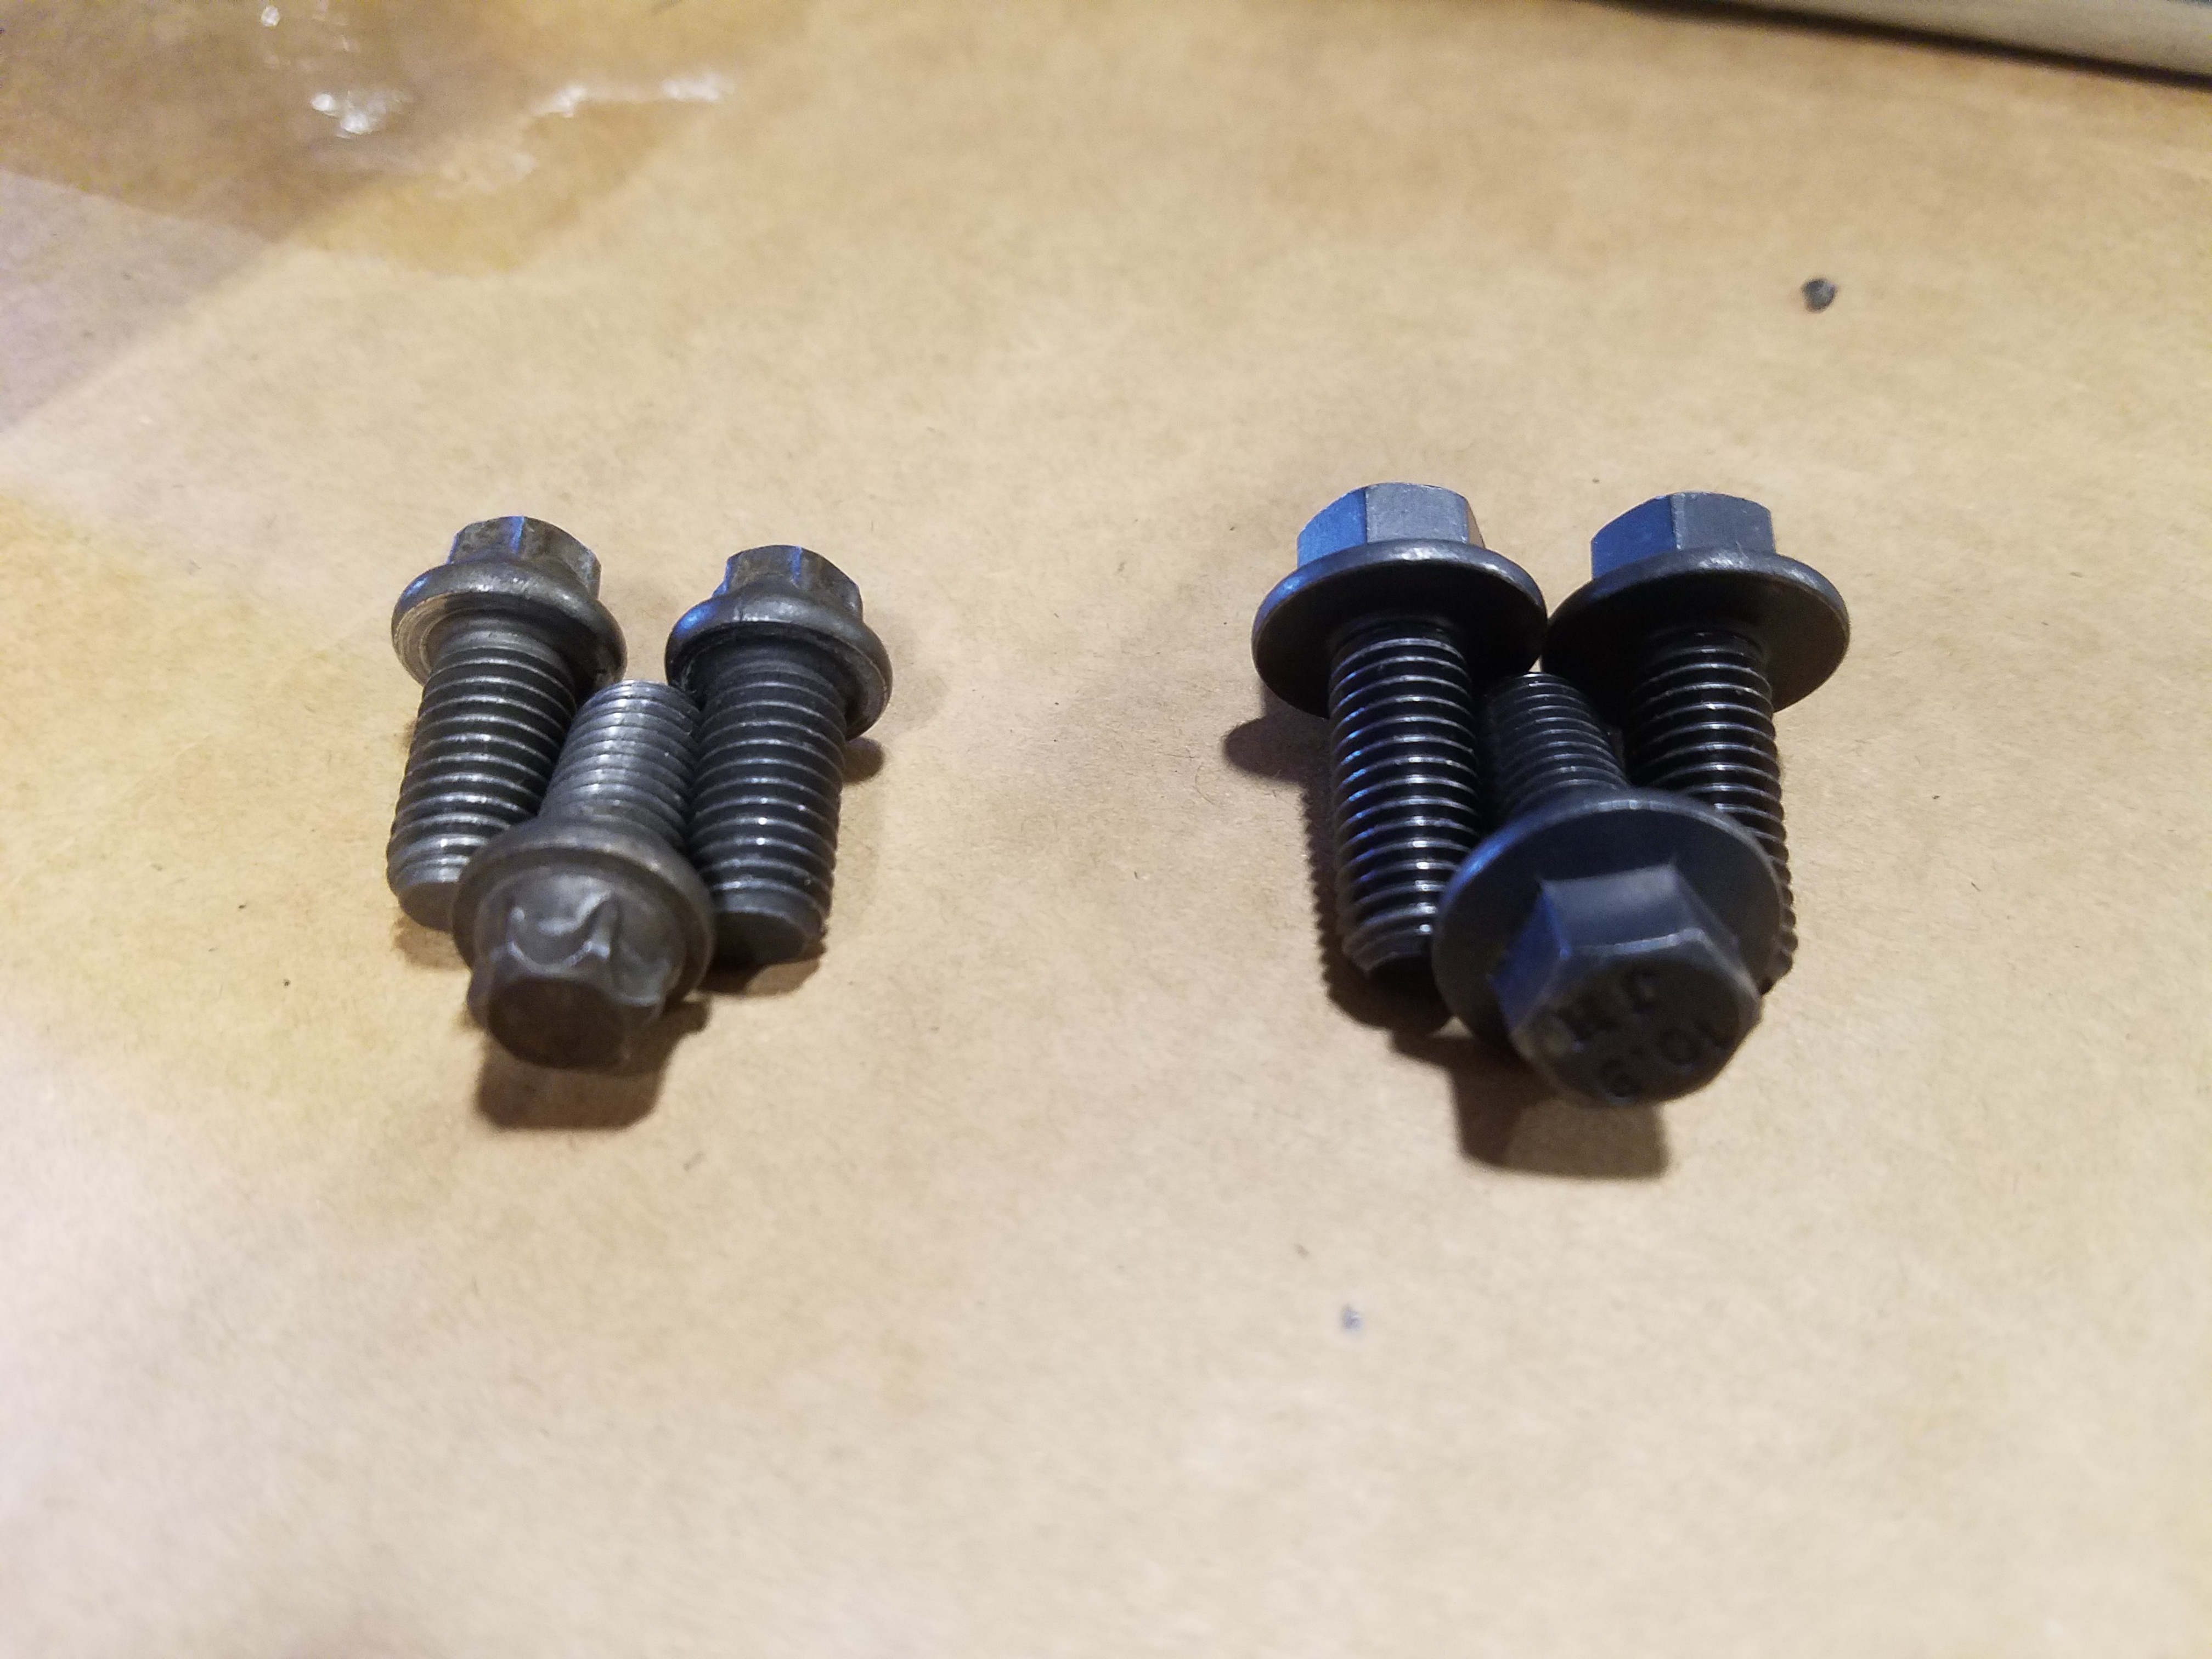 Comparing bolts.